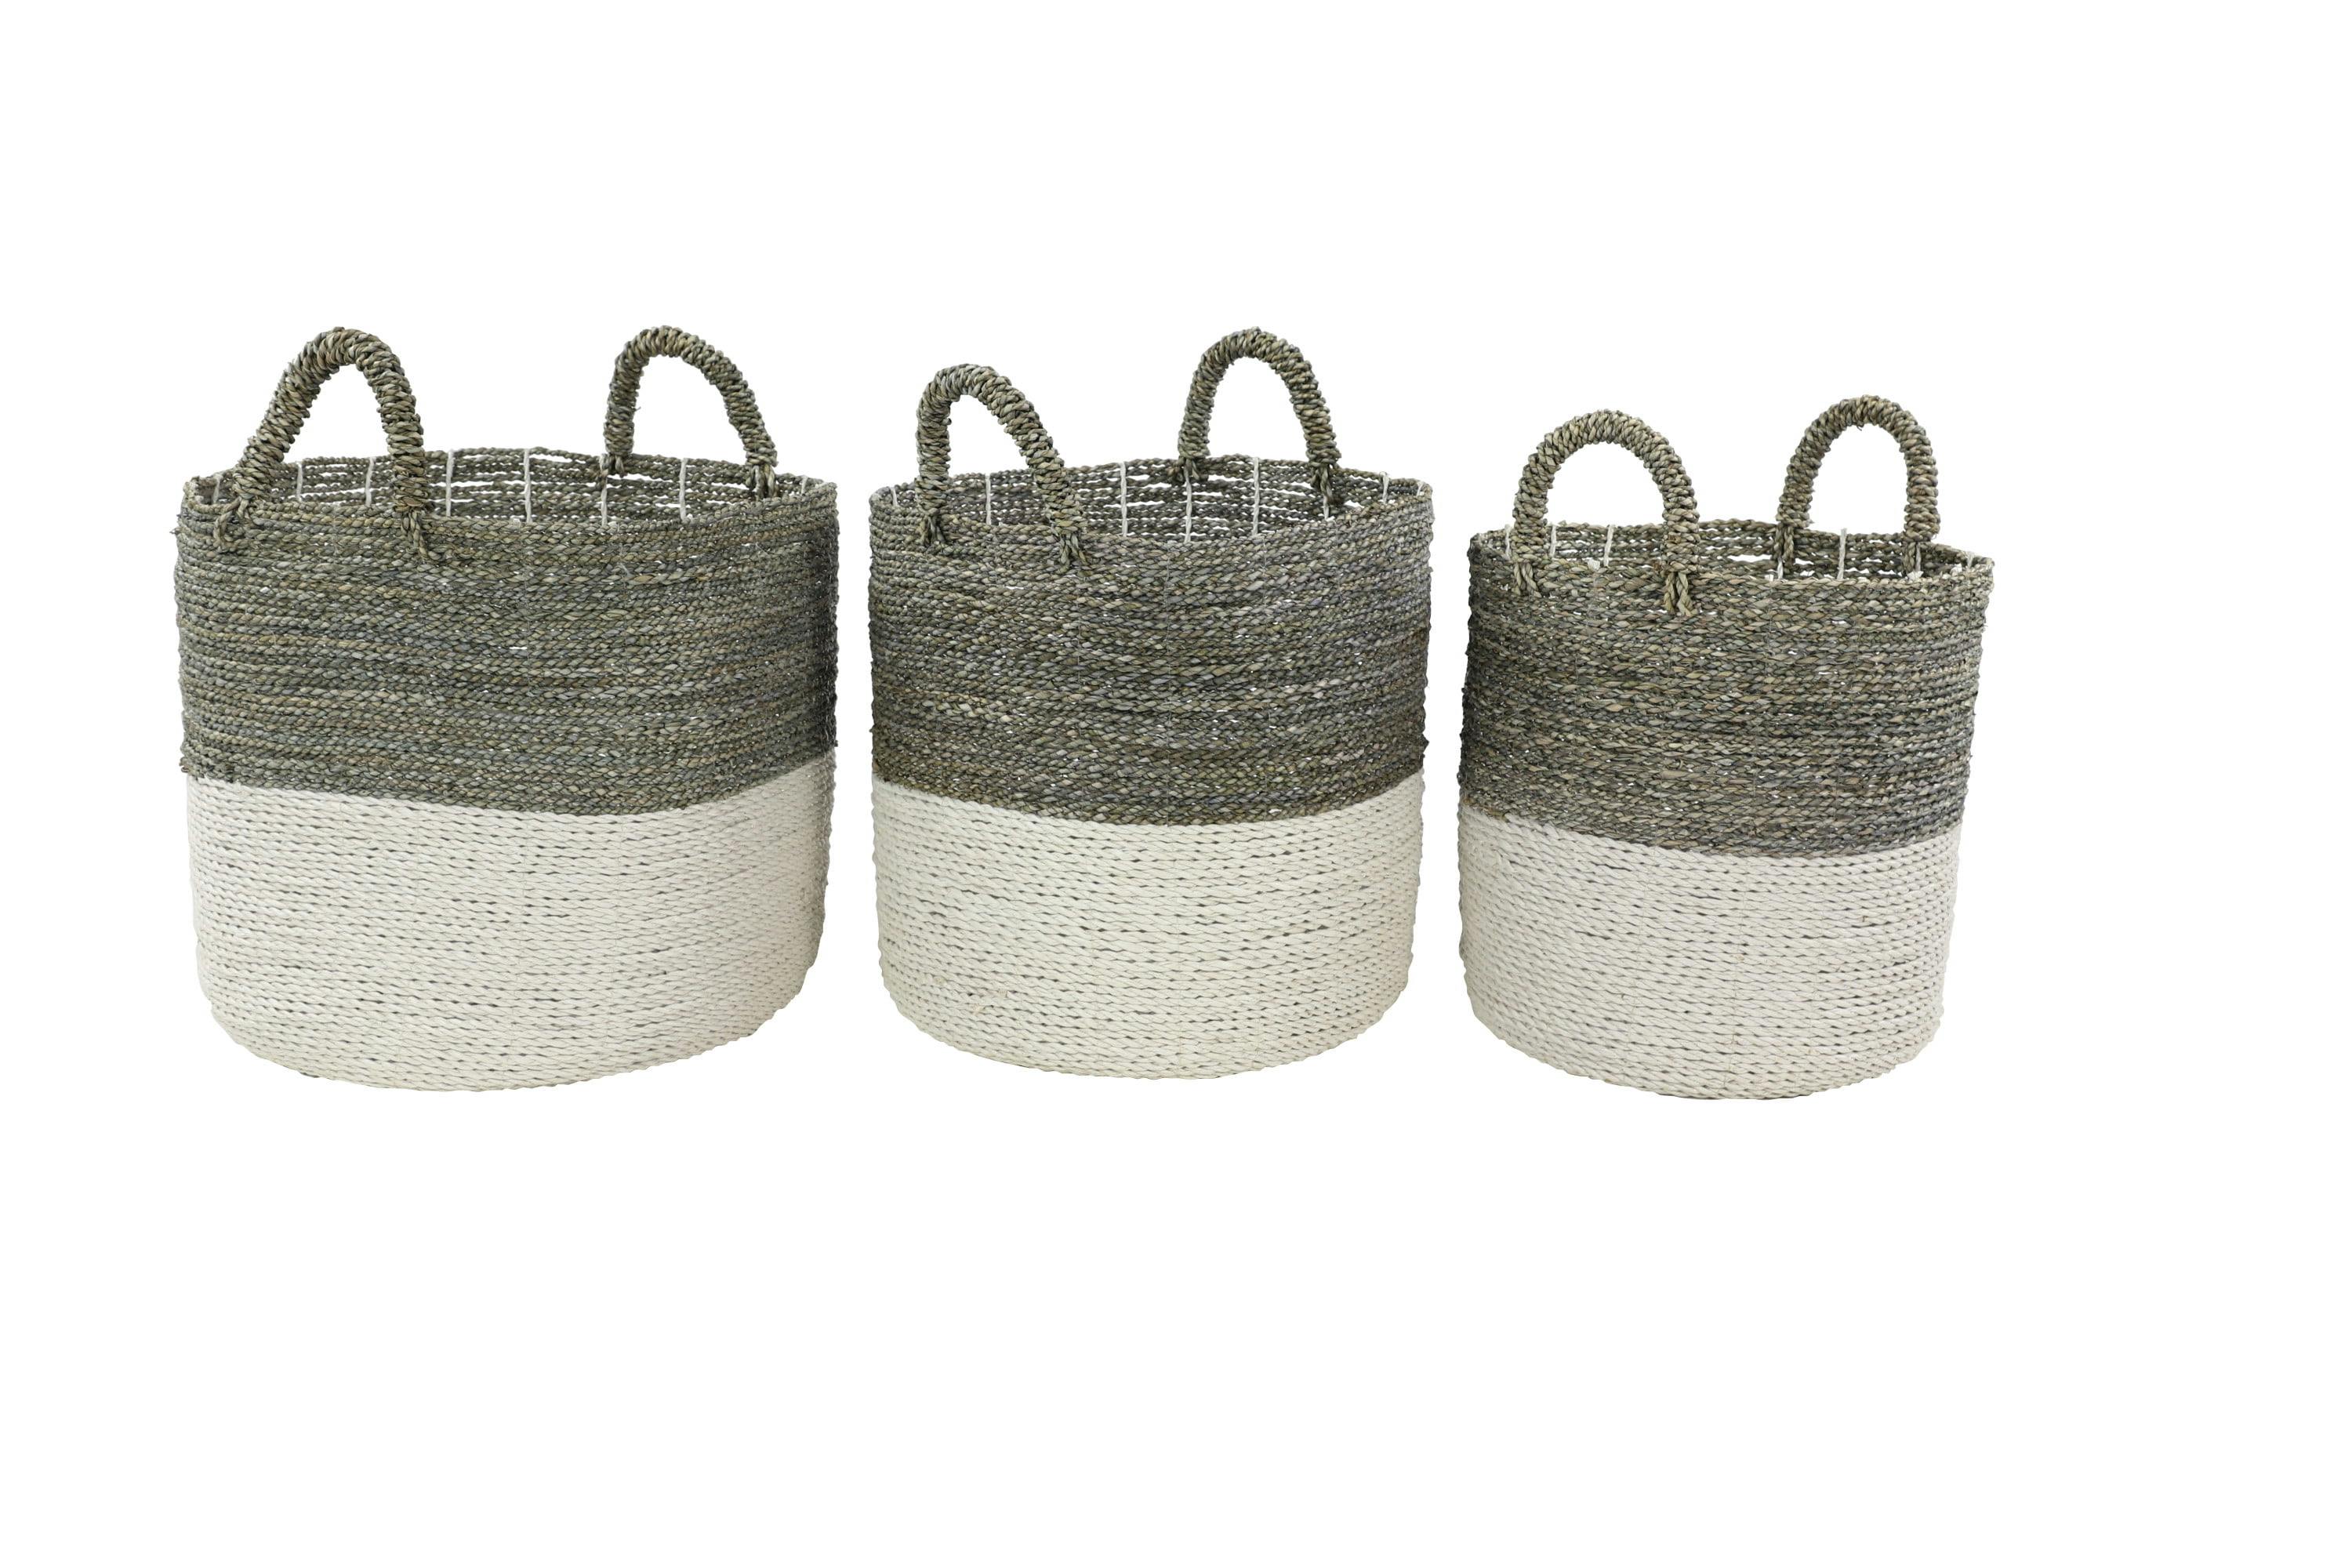 Coastal Charm White and Natural Seagrass Round Storage Baskets, Set of 3